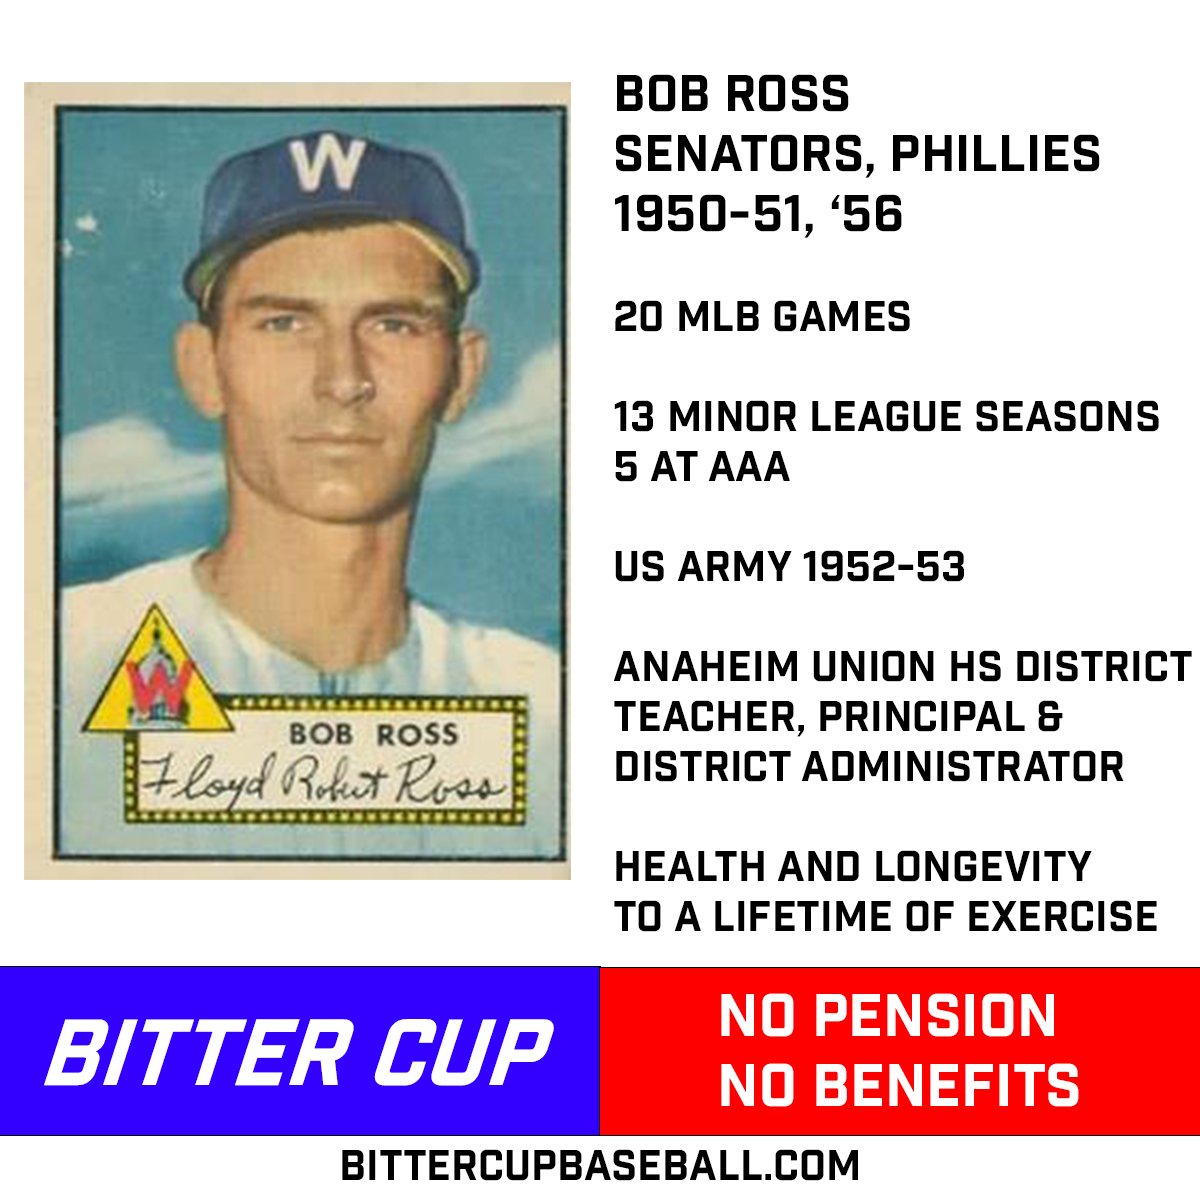 Bob Ross is 95 years yong today. 
@USArmy vet went into education after baseball. Again, no #MLBPA pension since #MLB service was pre-1980. There is a small stipend which is much less.  bittercupbaseball.com